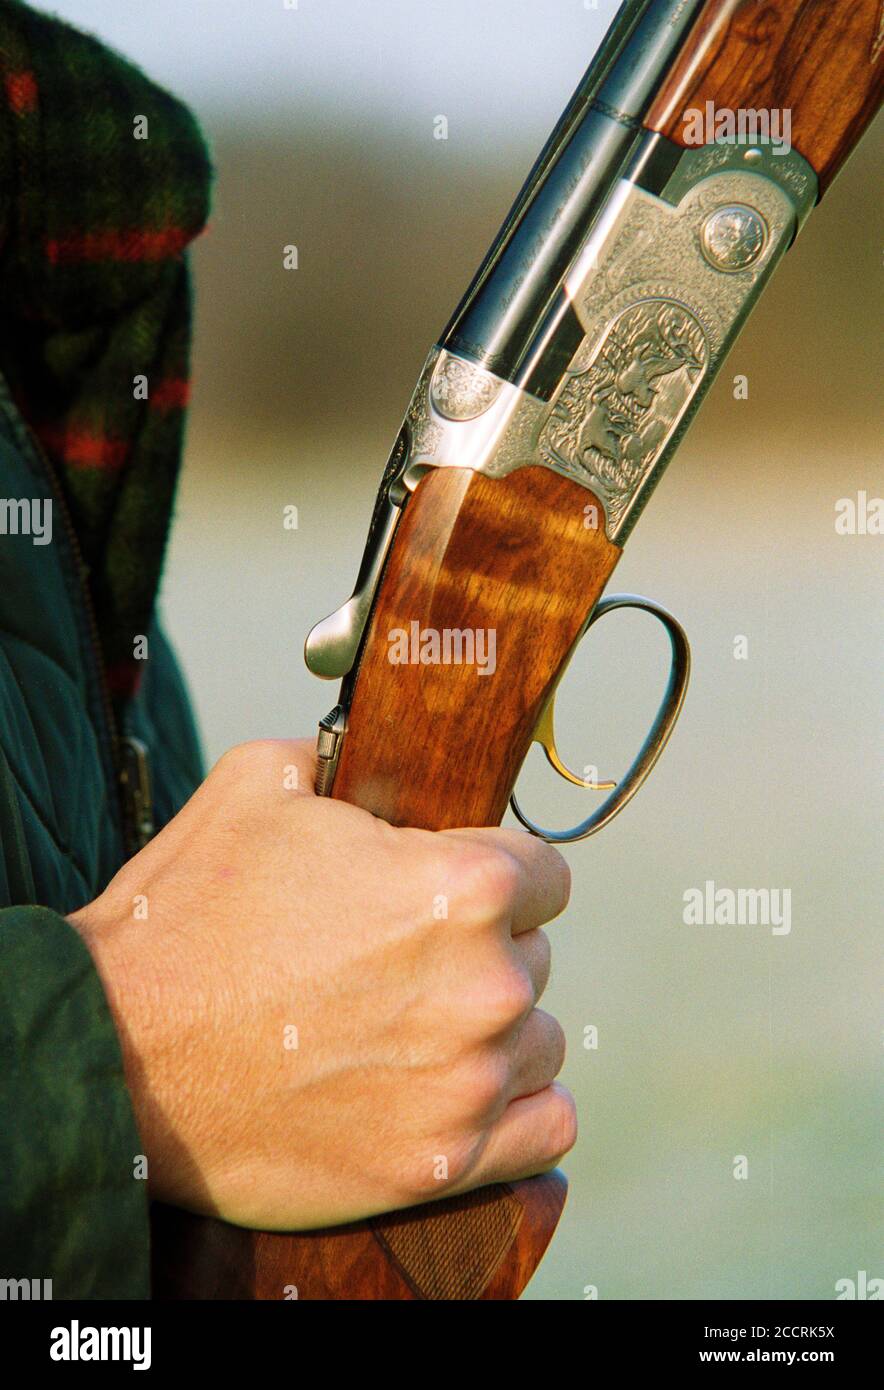 Close up of a hand holding a Beretta side by side shotgun.  UK Circa 2001. Stock Photo